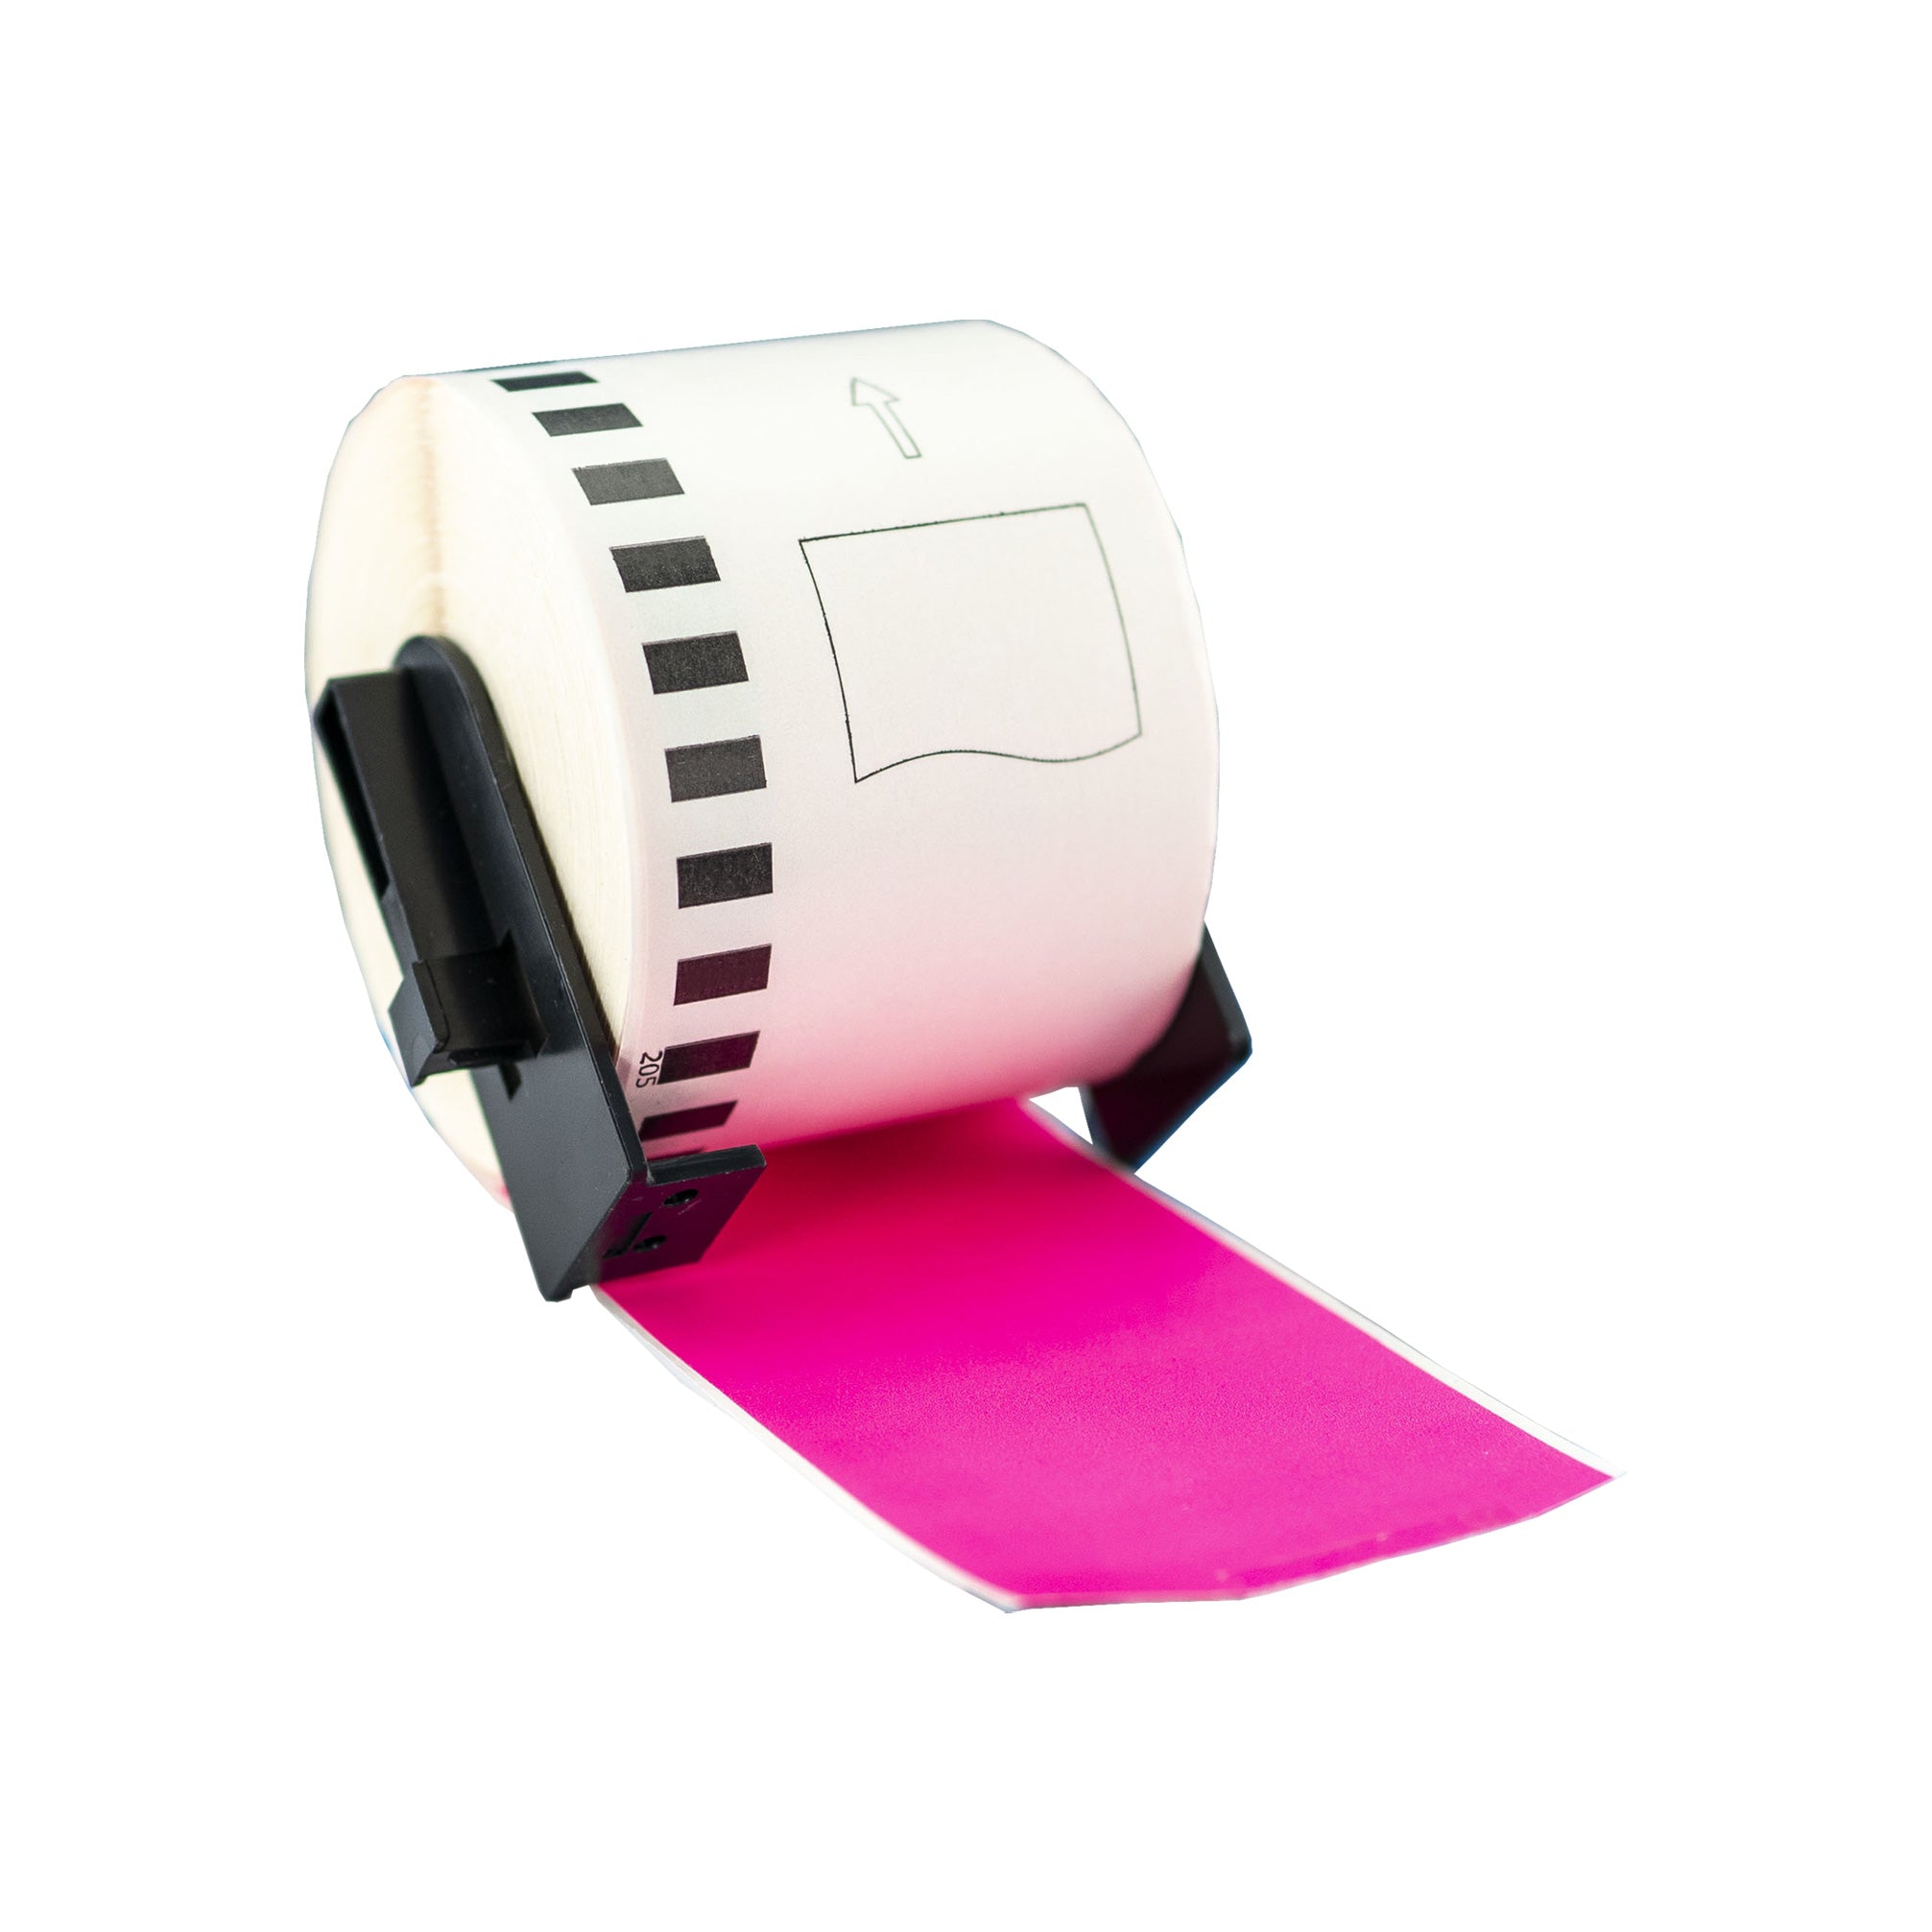 Compatible Brother DK-11202 Pink Shipping Labels 62 X 100mm/ 50 Rolls